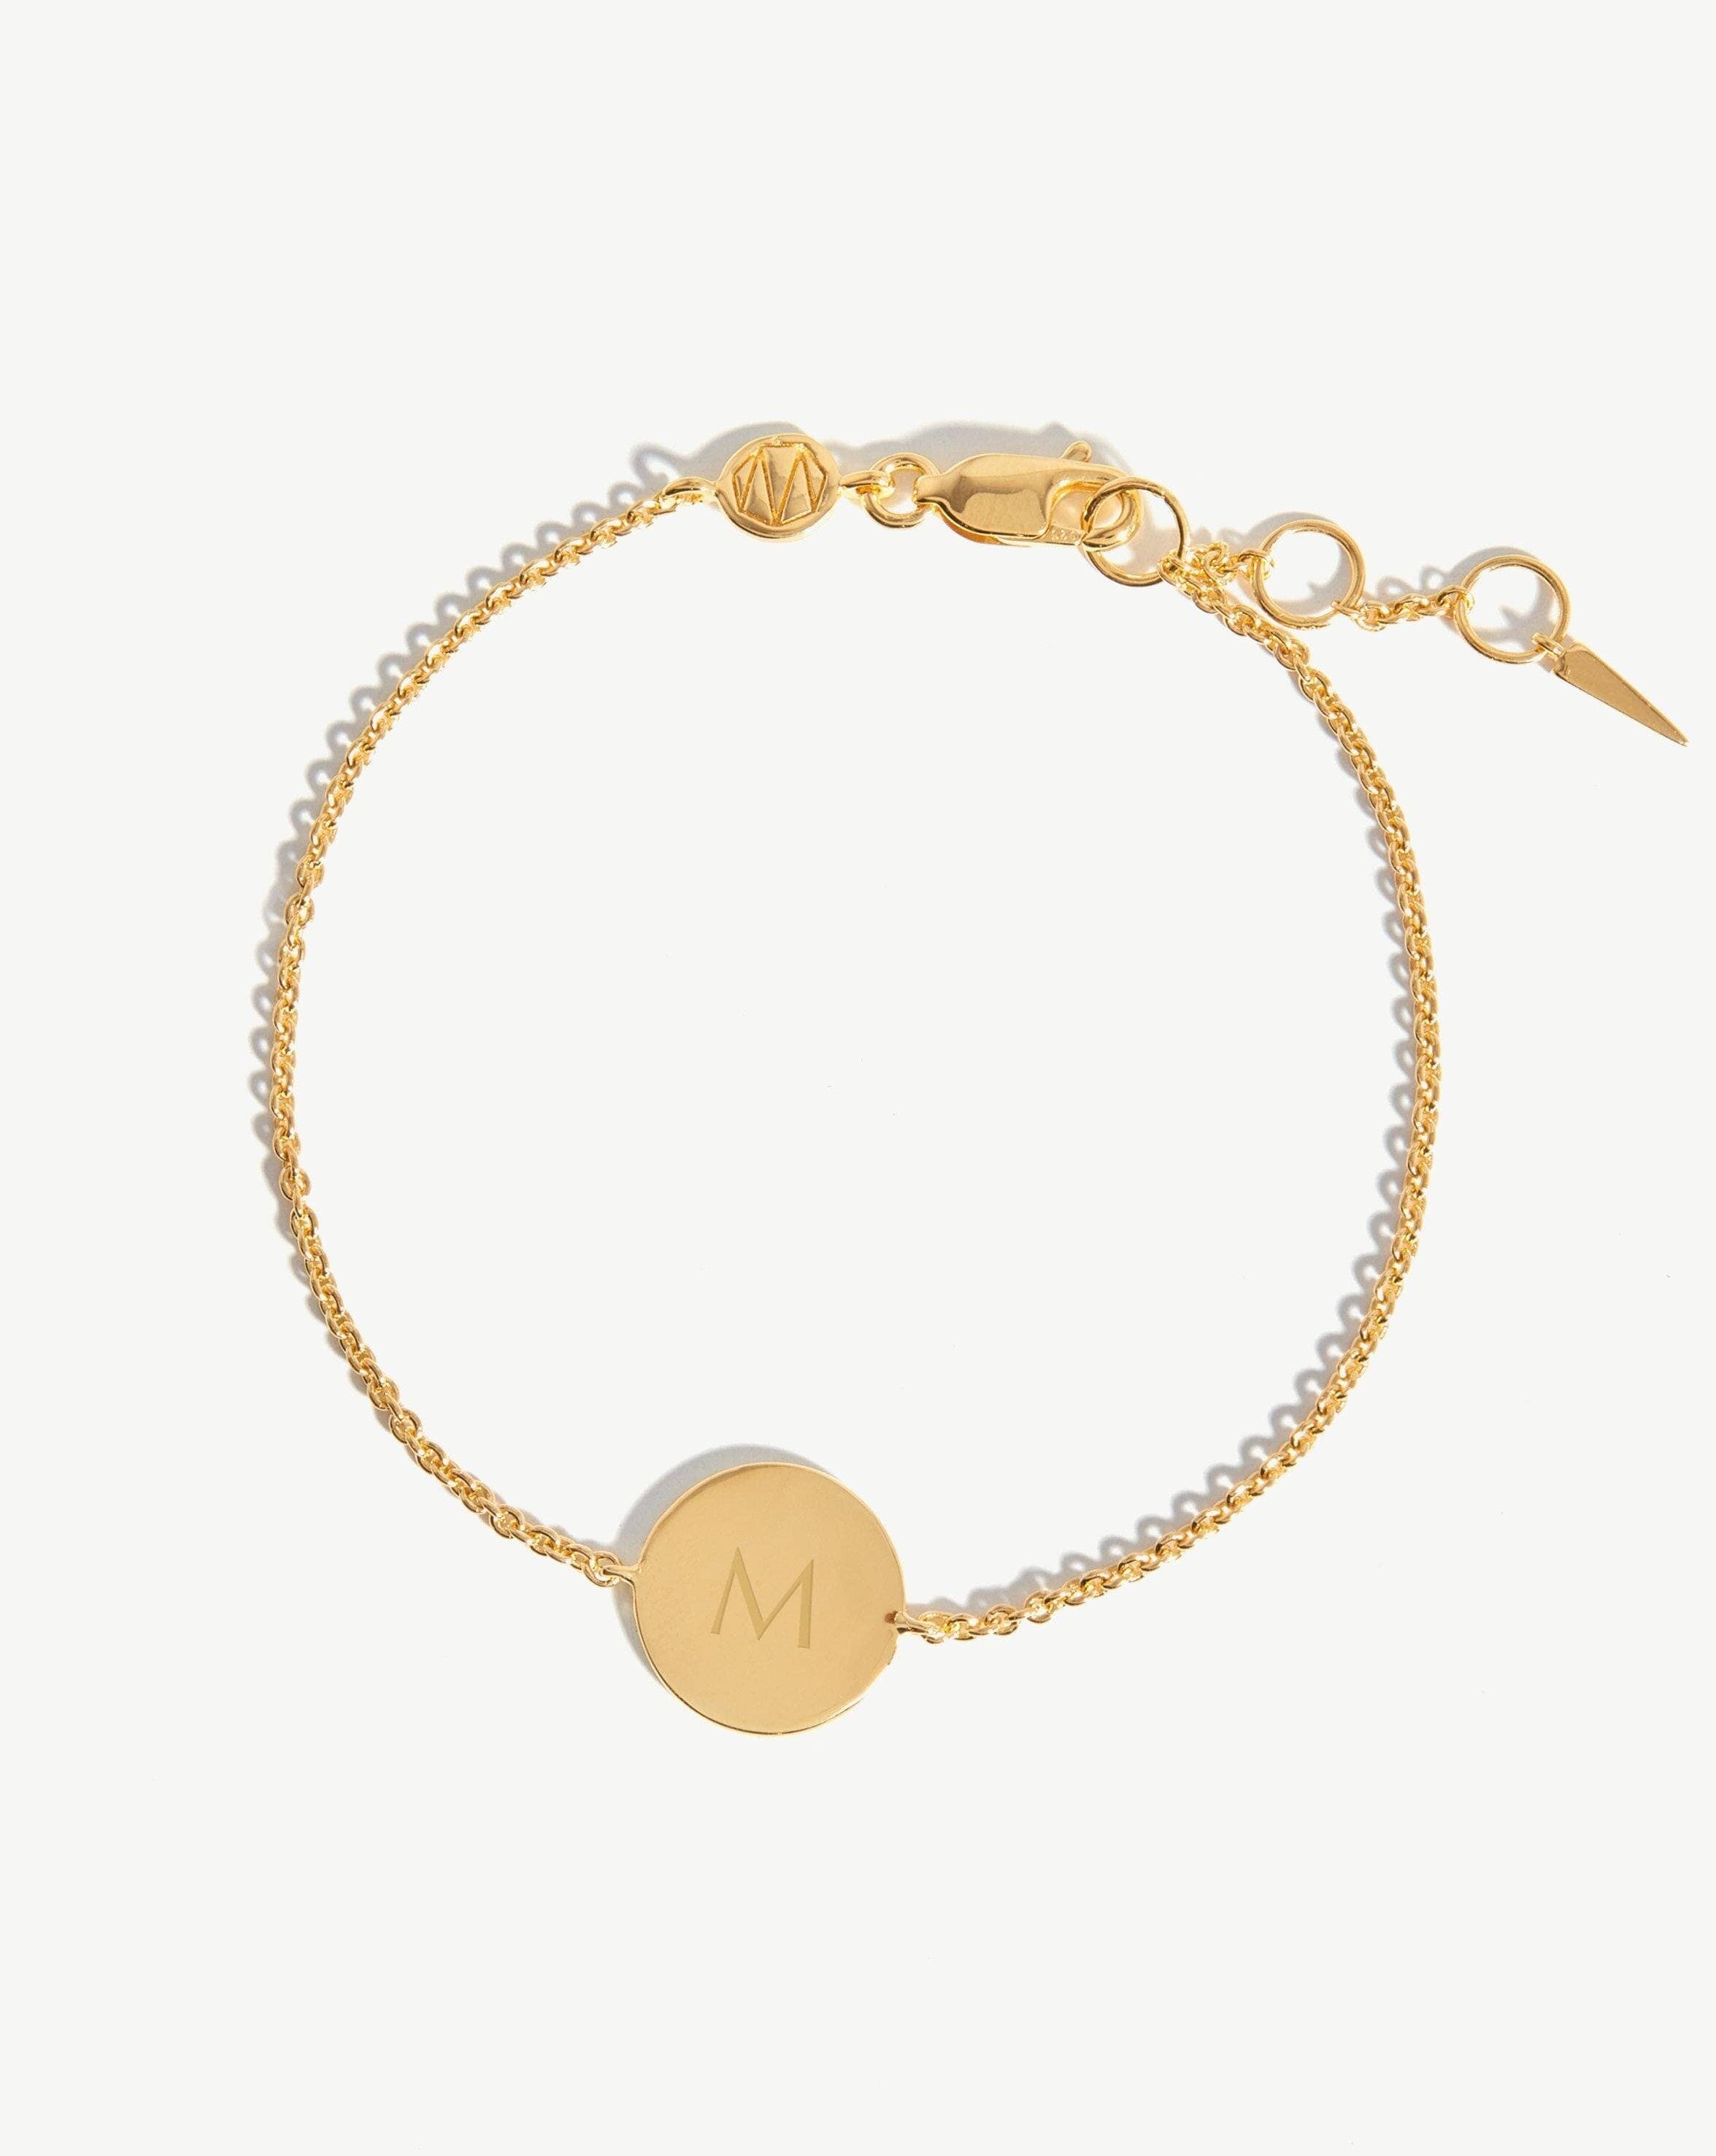 Link Chain Hexa Bar Bracelet with Names in Gold Vermeil - Gifts For Her